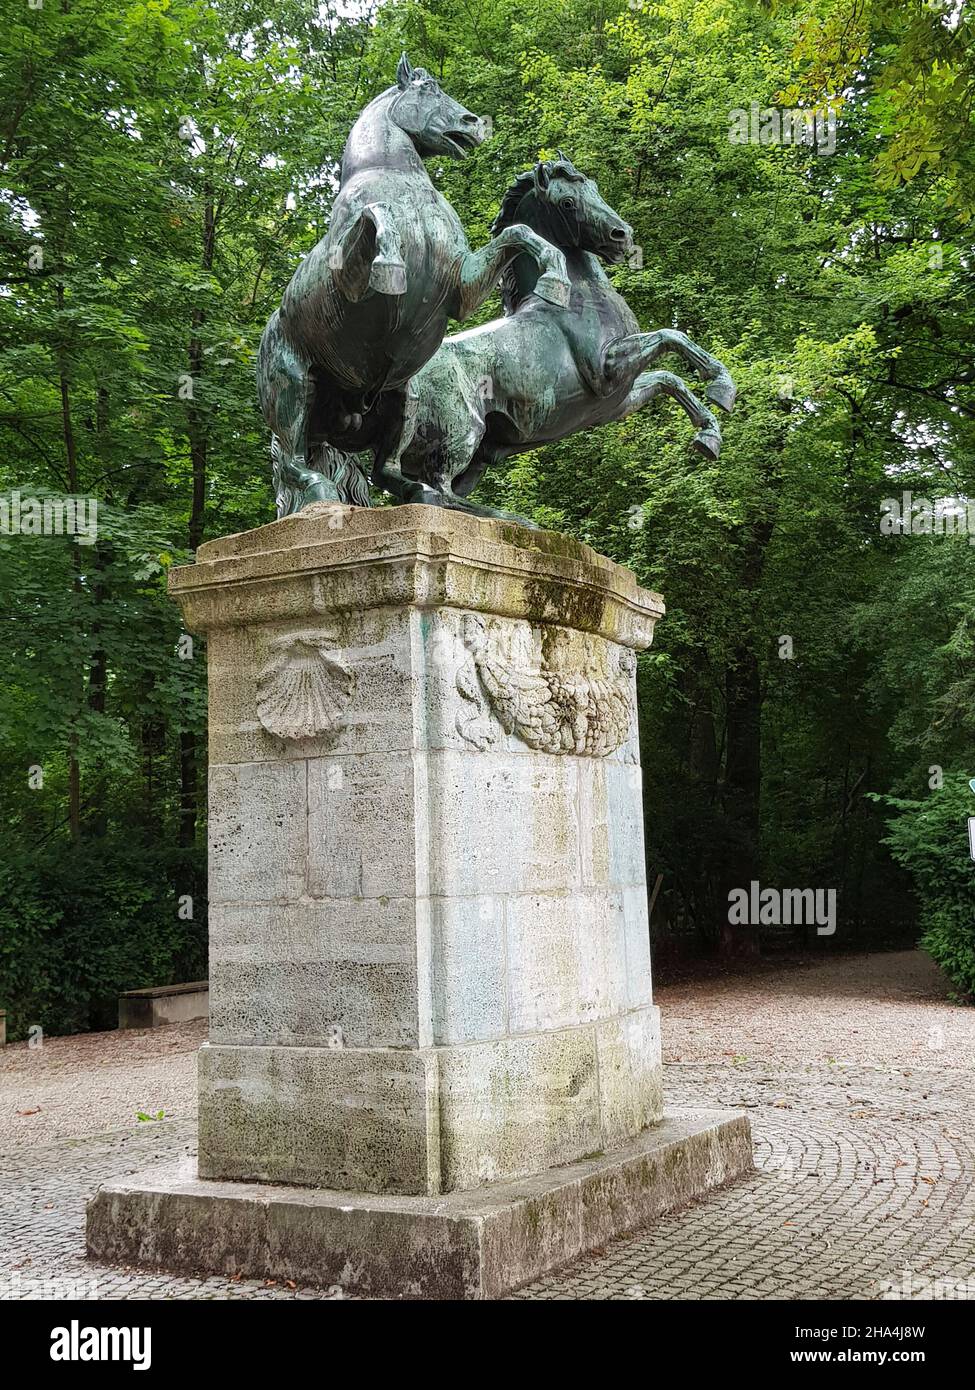 bavariapark on theresienwiese,laid out by king ludwig i between 1825 - 1831,large lawn,lush trees. a tour takes you past numerous sculptures,including these bronze horses,pedestals with scallops. Stock Photo